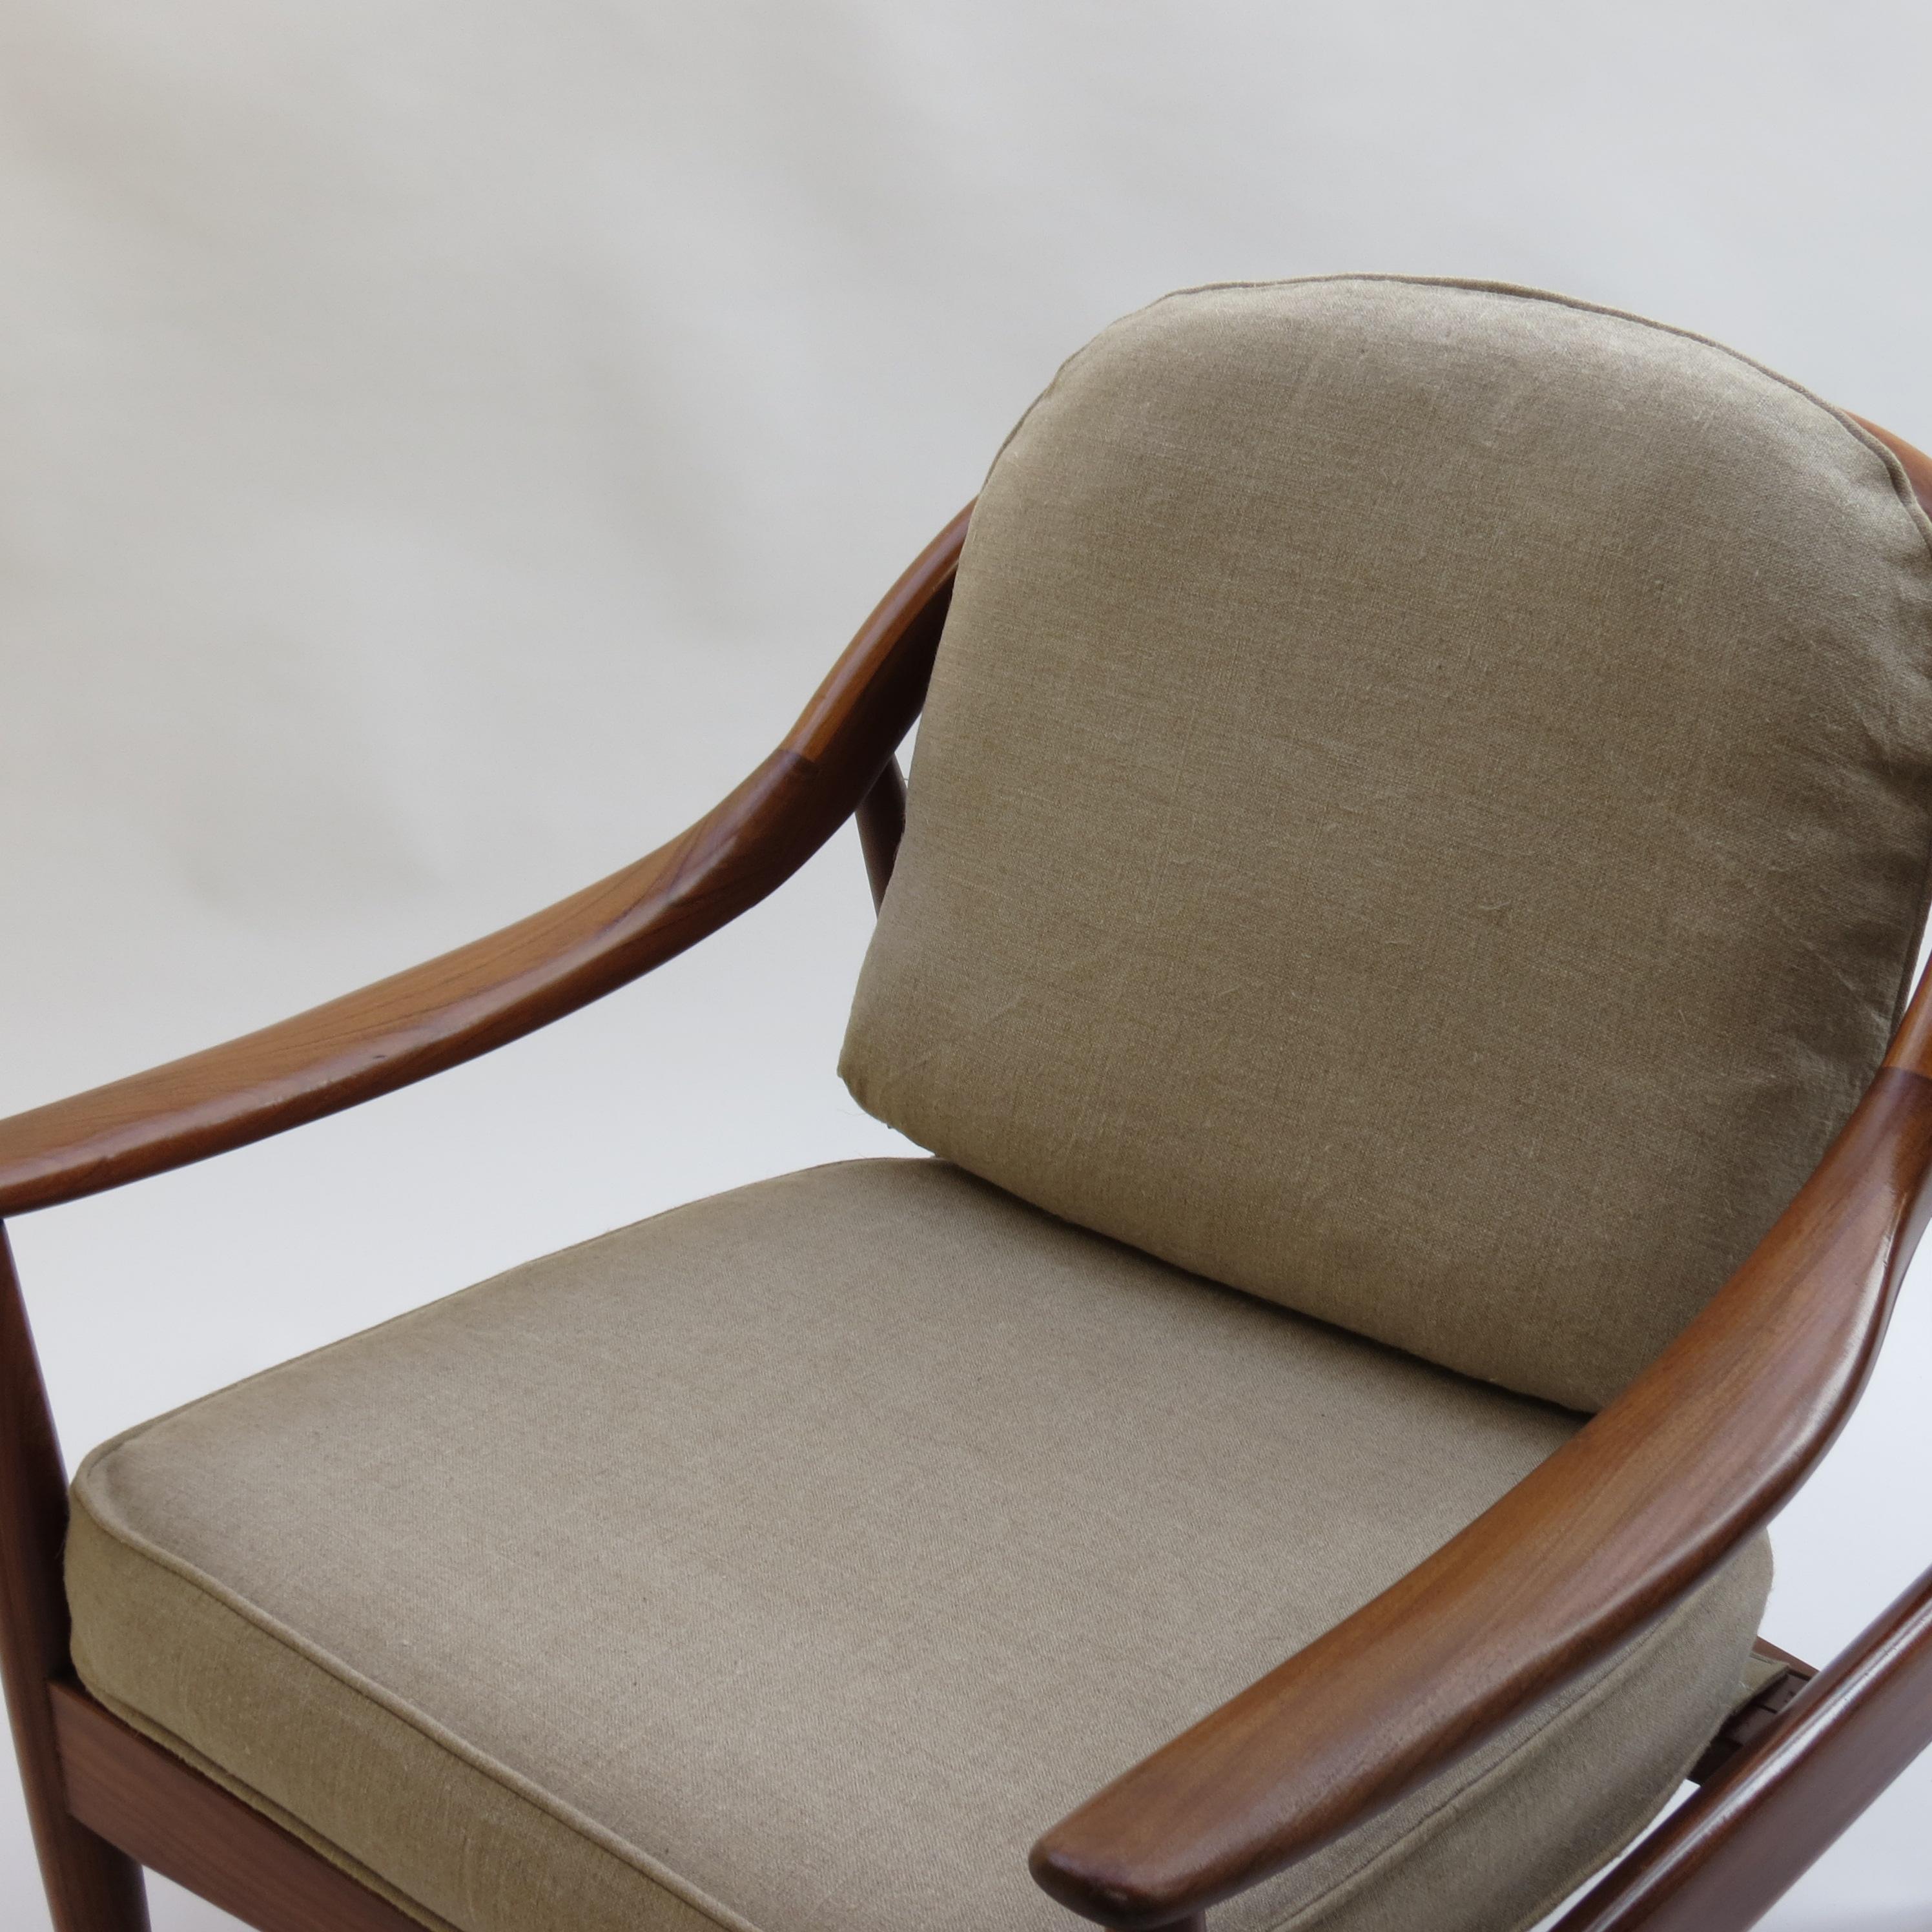 Afrormosia Midcentury Armchair by Greaves and Thomas 1960s B 7